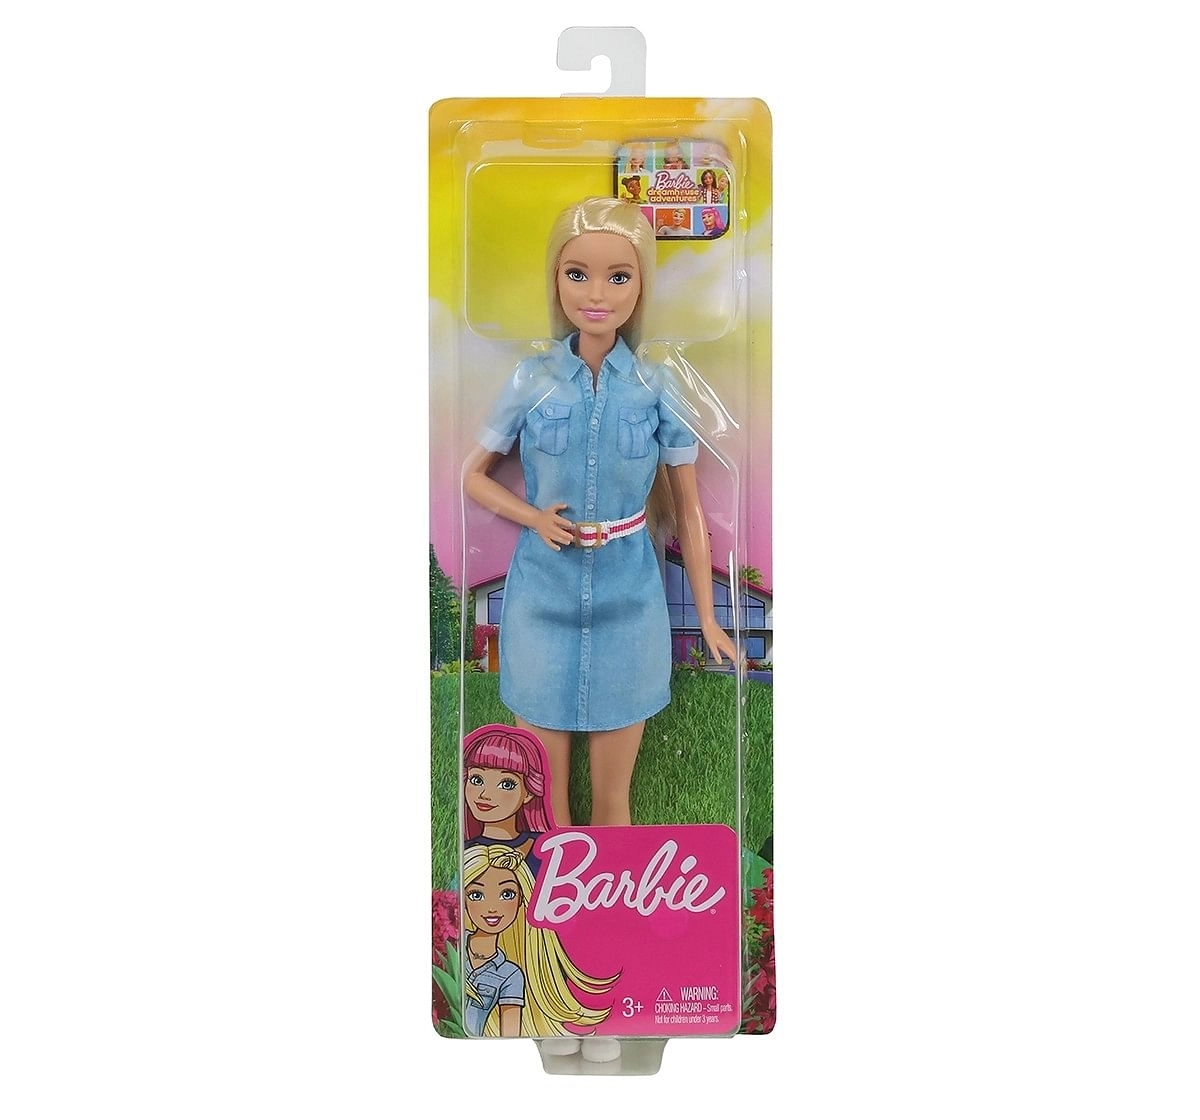 Barbie dreamhouse adventure doll Dolls & Accessories for age 3Y+ 